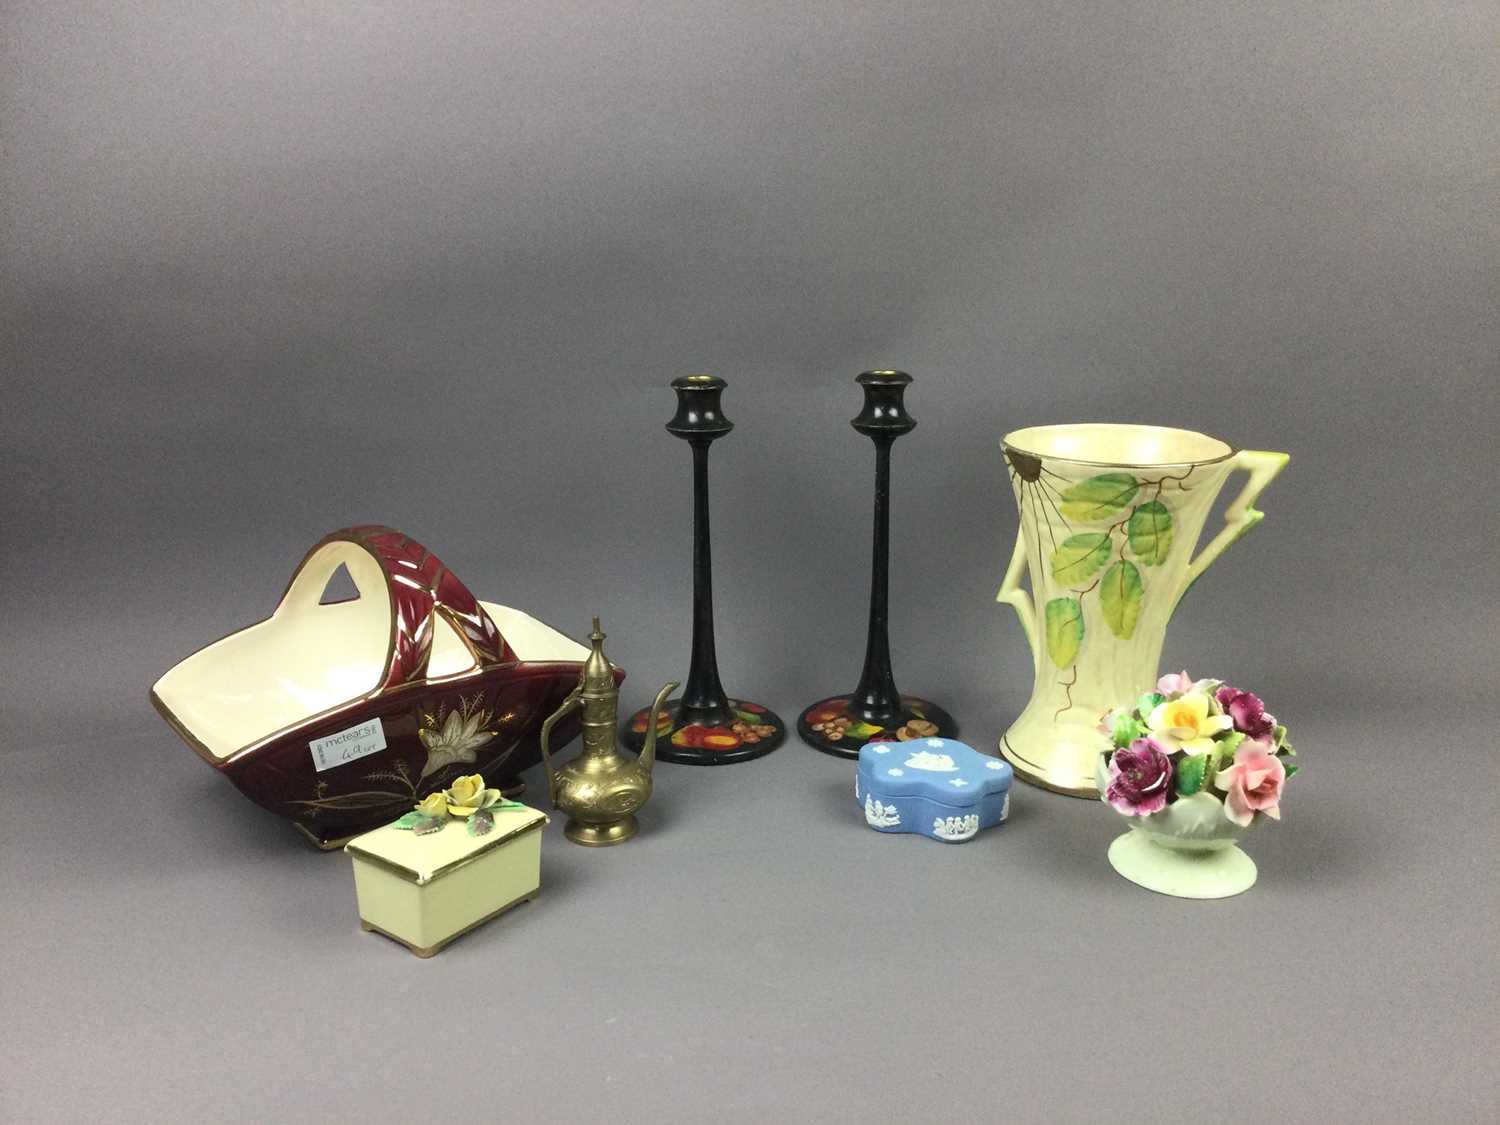 Lot 49 - AN ART DECO ARTHUR WOOD VASE AND OTHER CERAMICS AND WOOD ITEMS